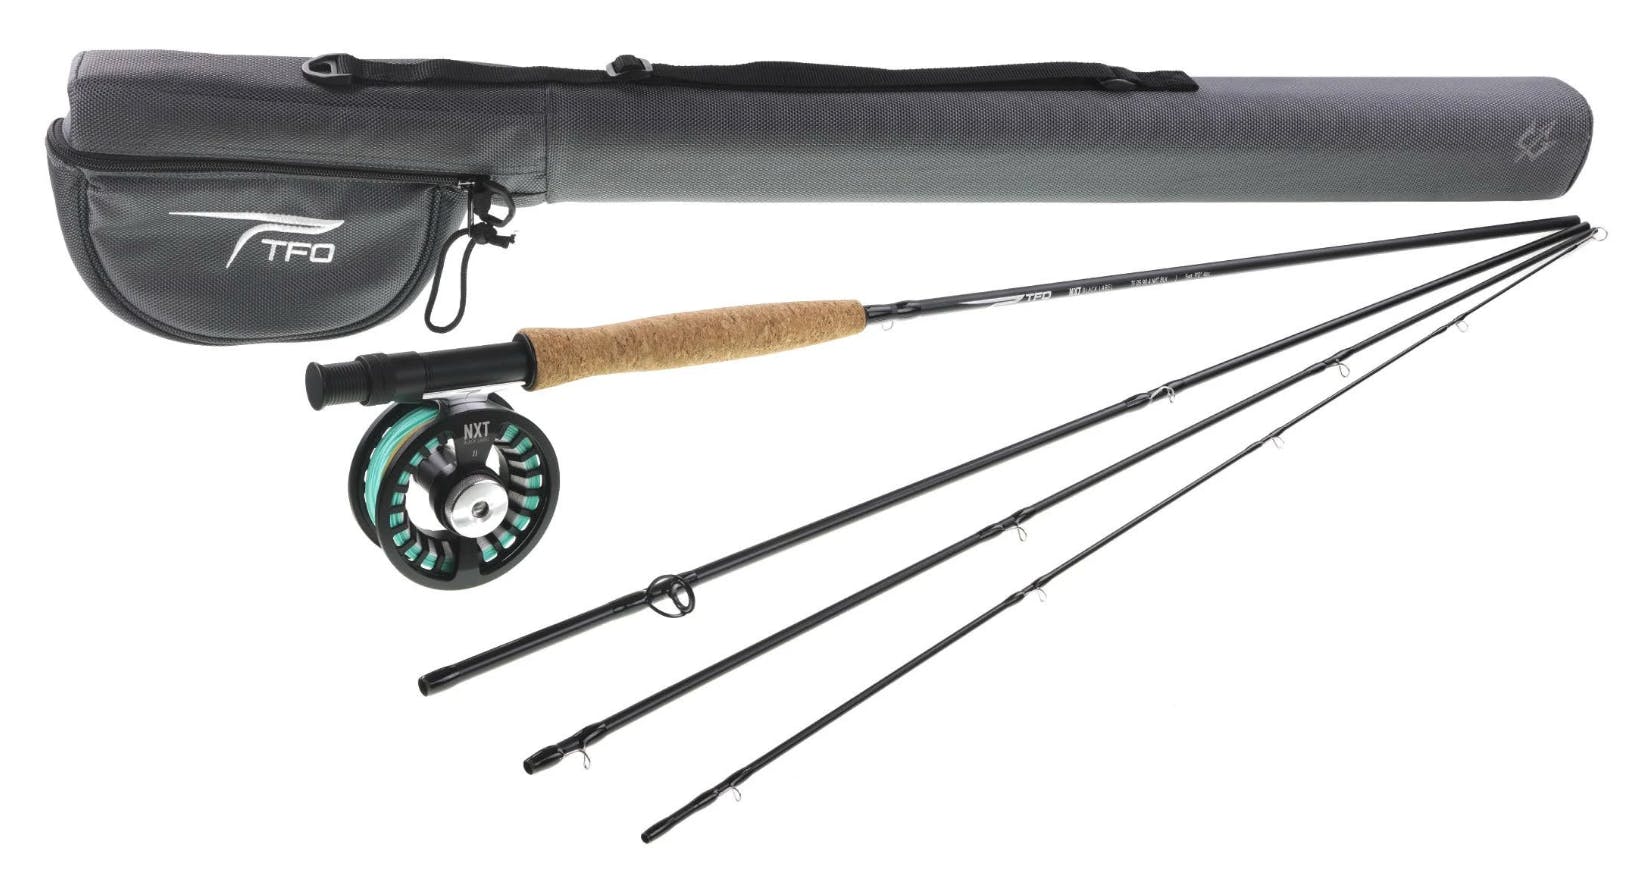 The Most Recommended Fly Fishing Combos for Beginners